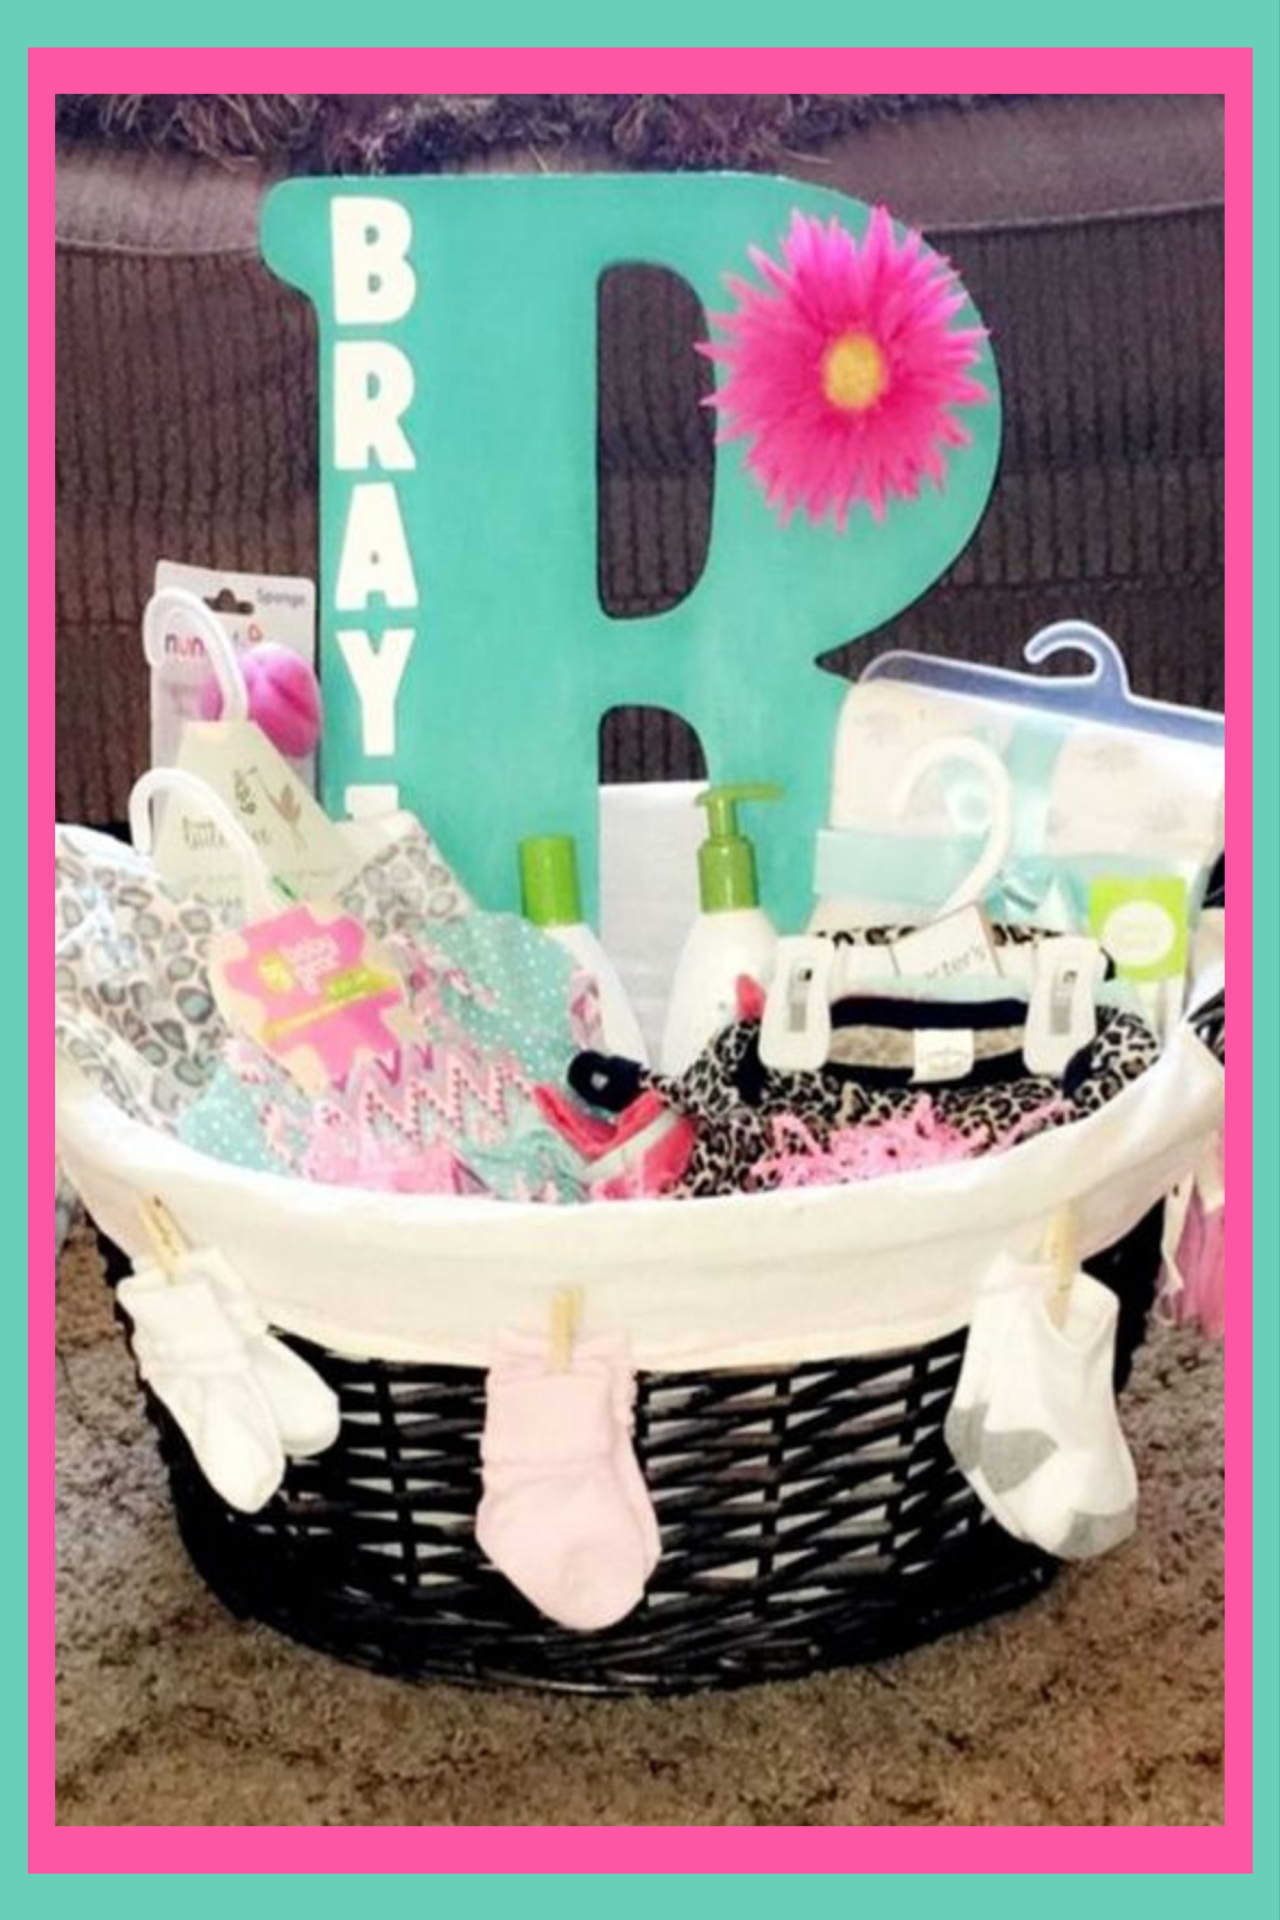 Baby shower gift ideas - unique baby shower gifts and baby shower baskets to make